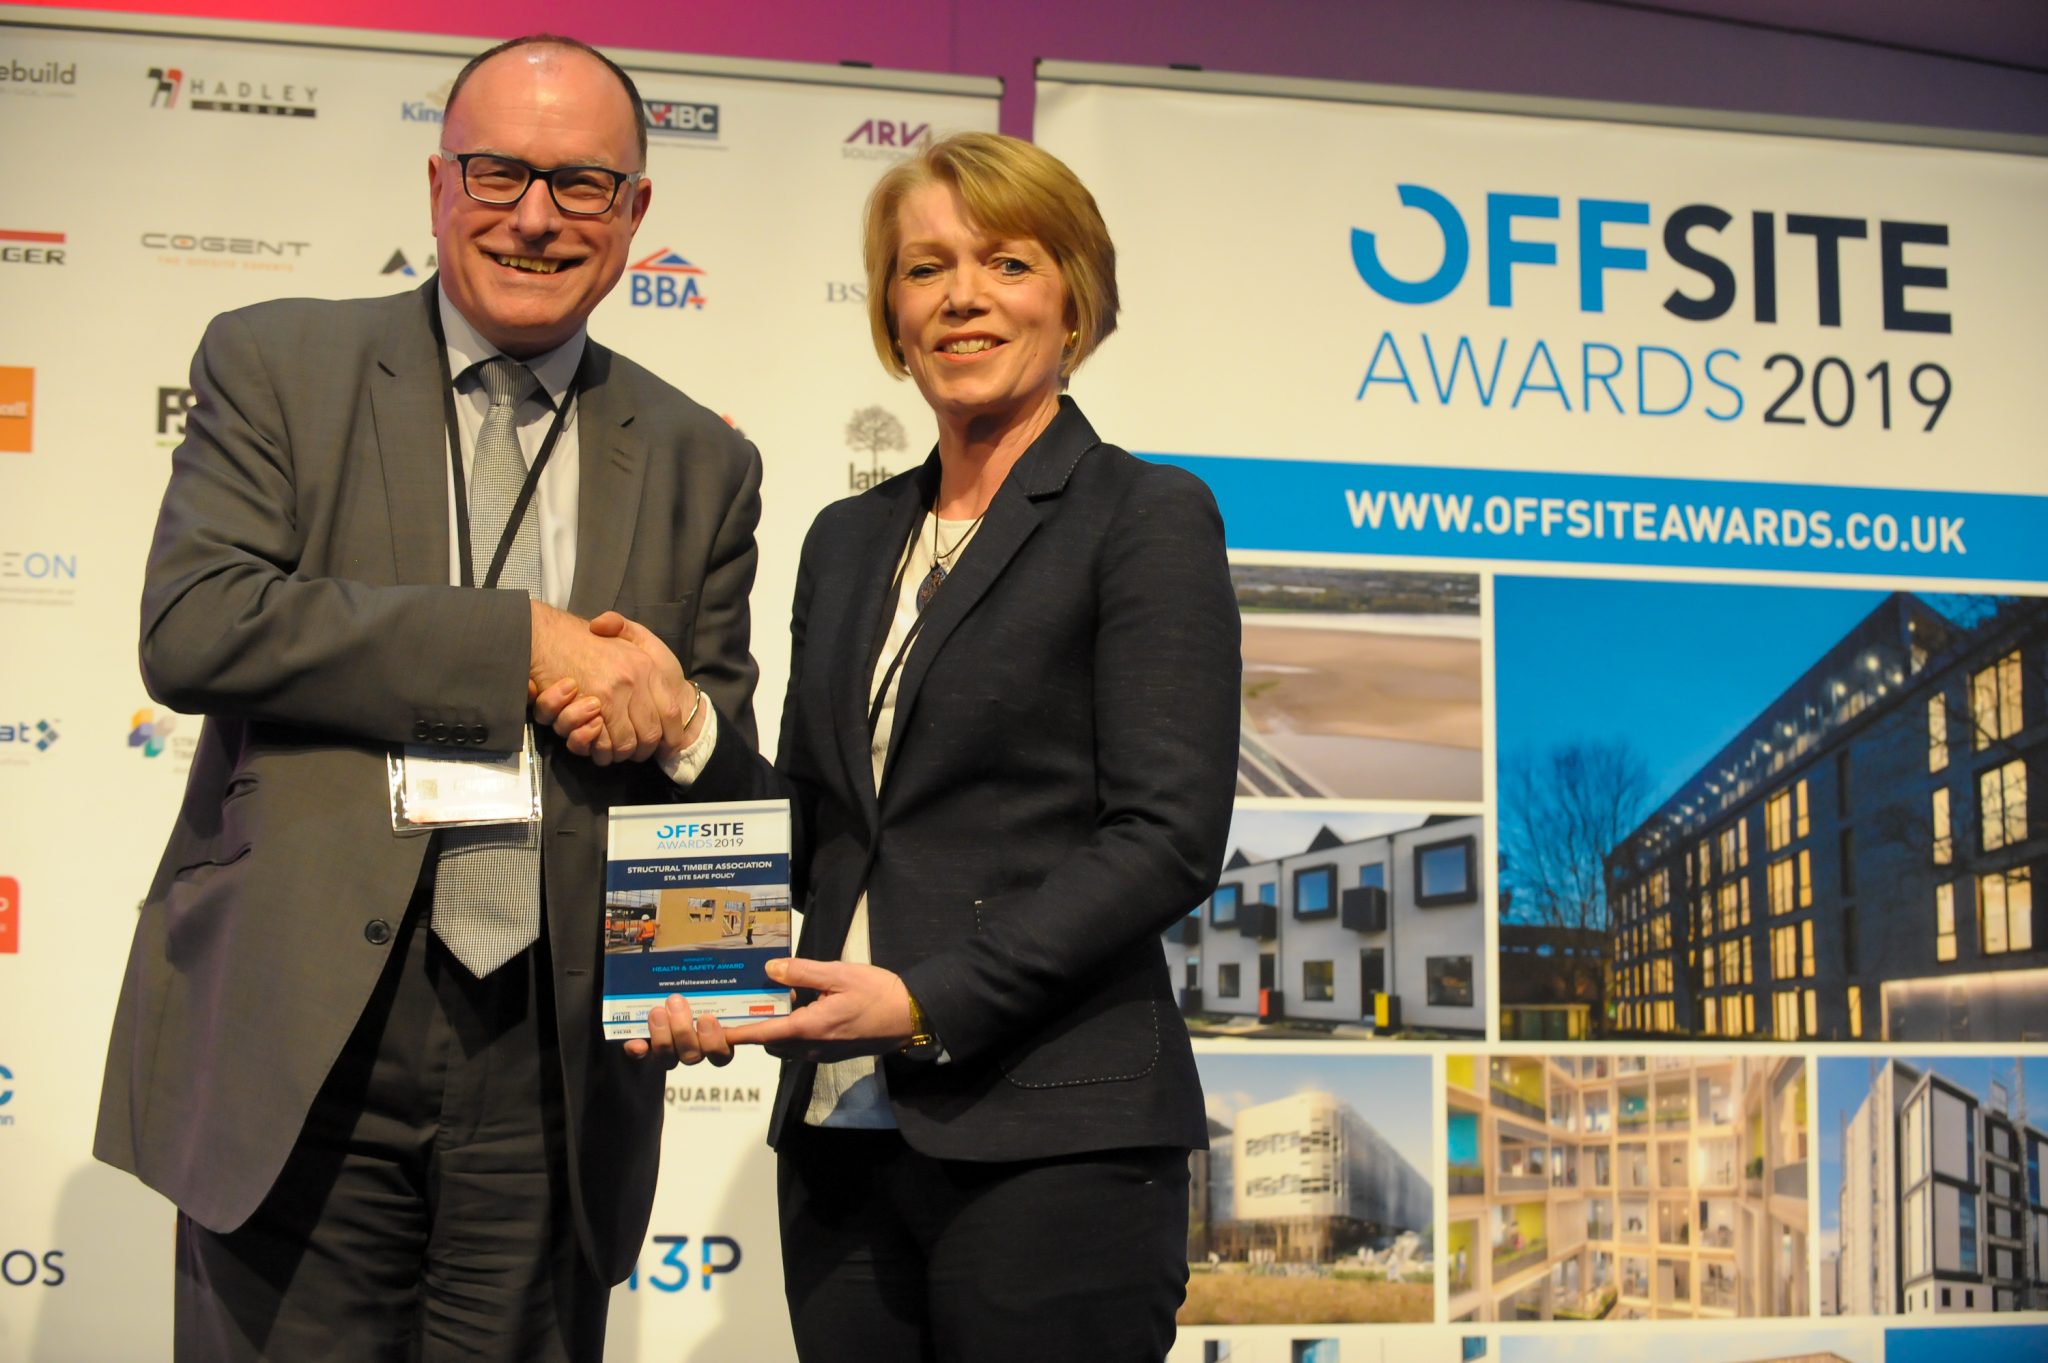 STA Health & Safety Policy Wins 2019 Offsite Award @STAtimber @ExploreOffsite